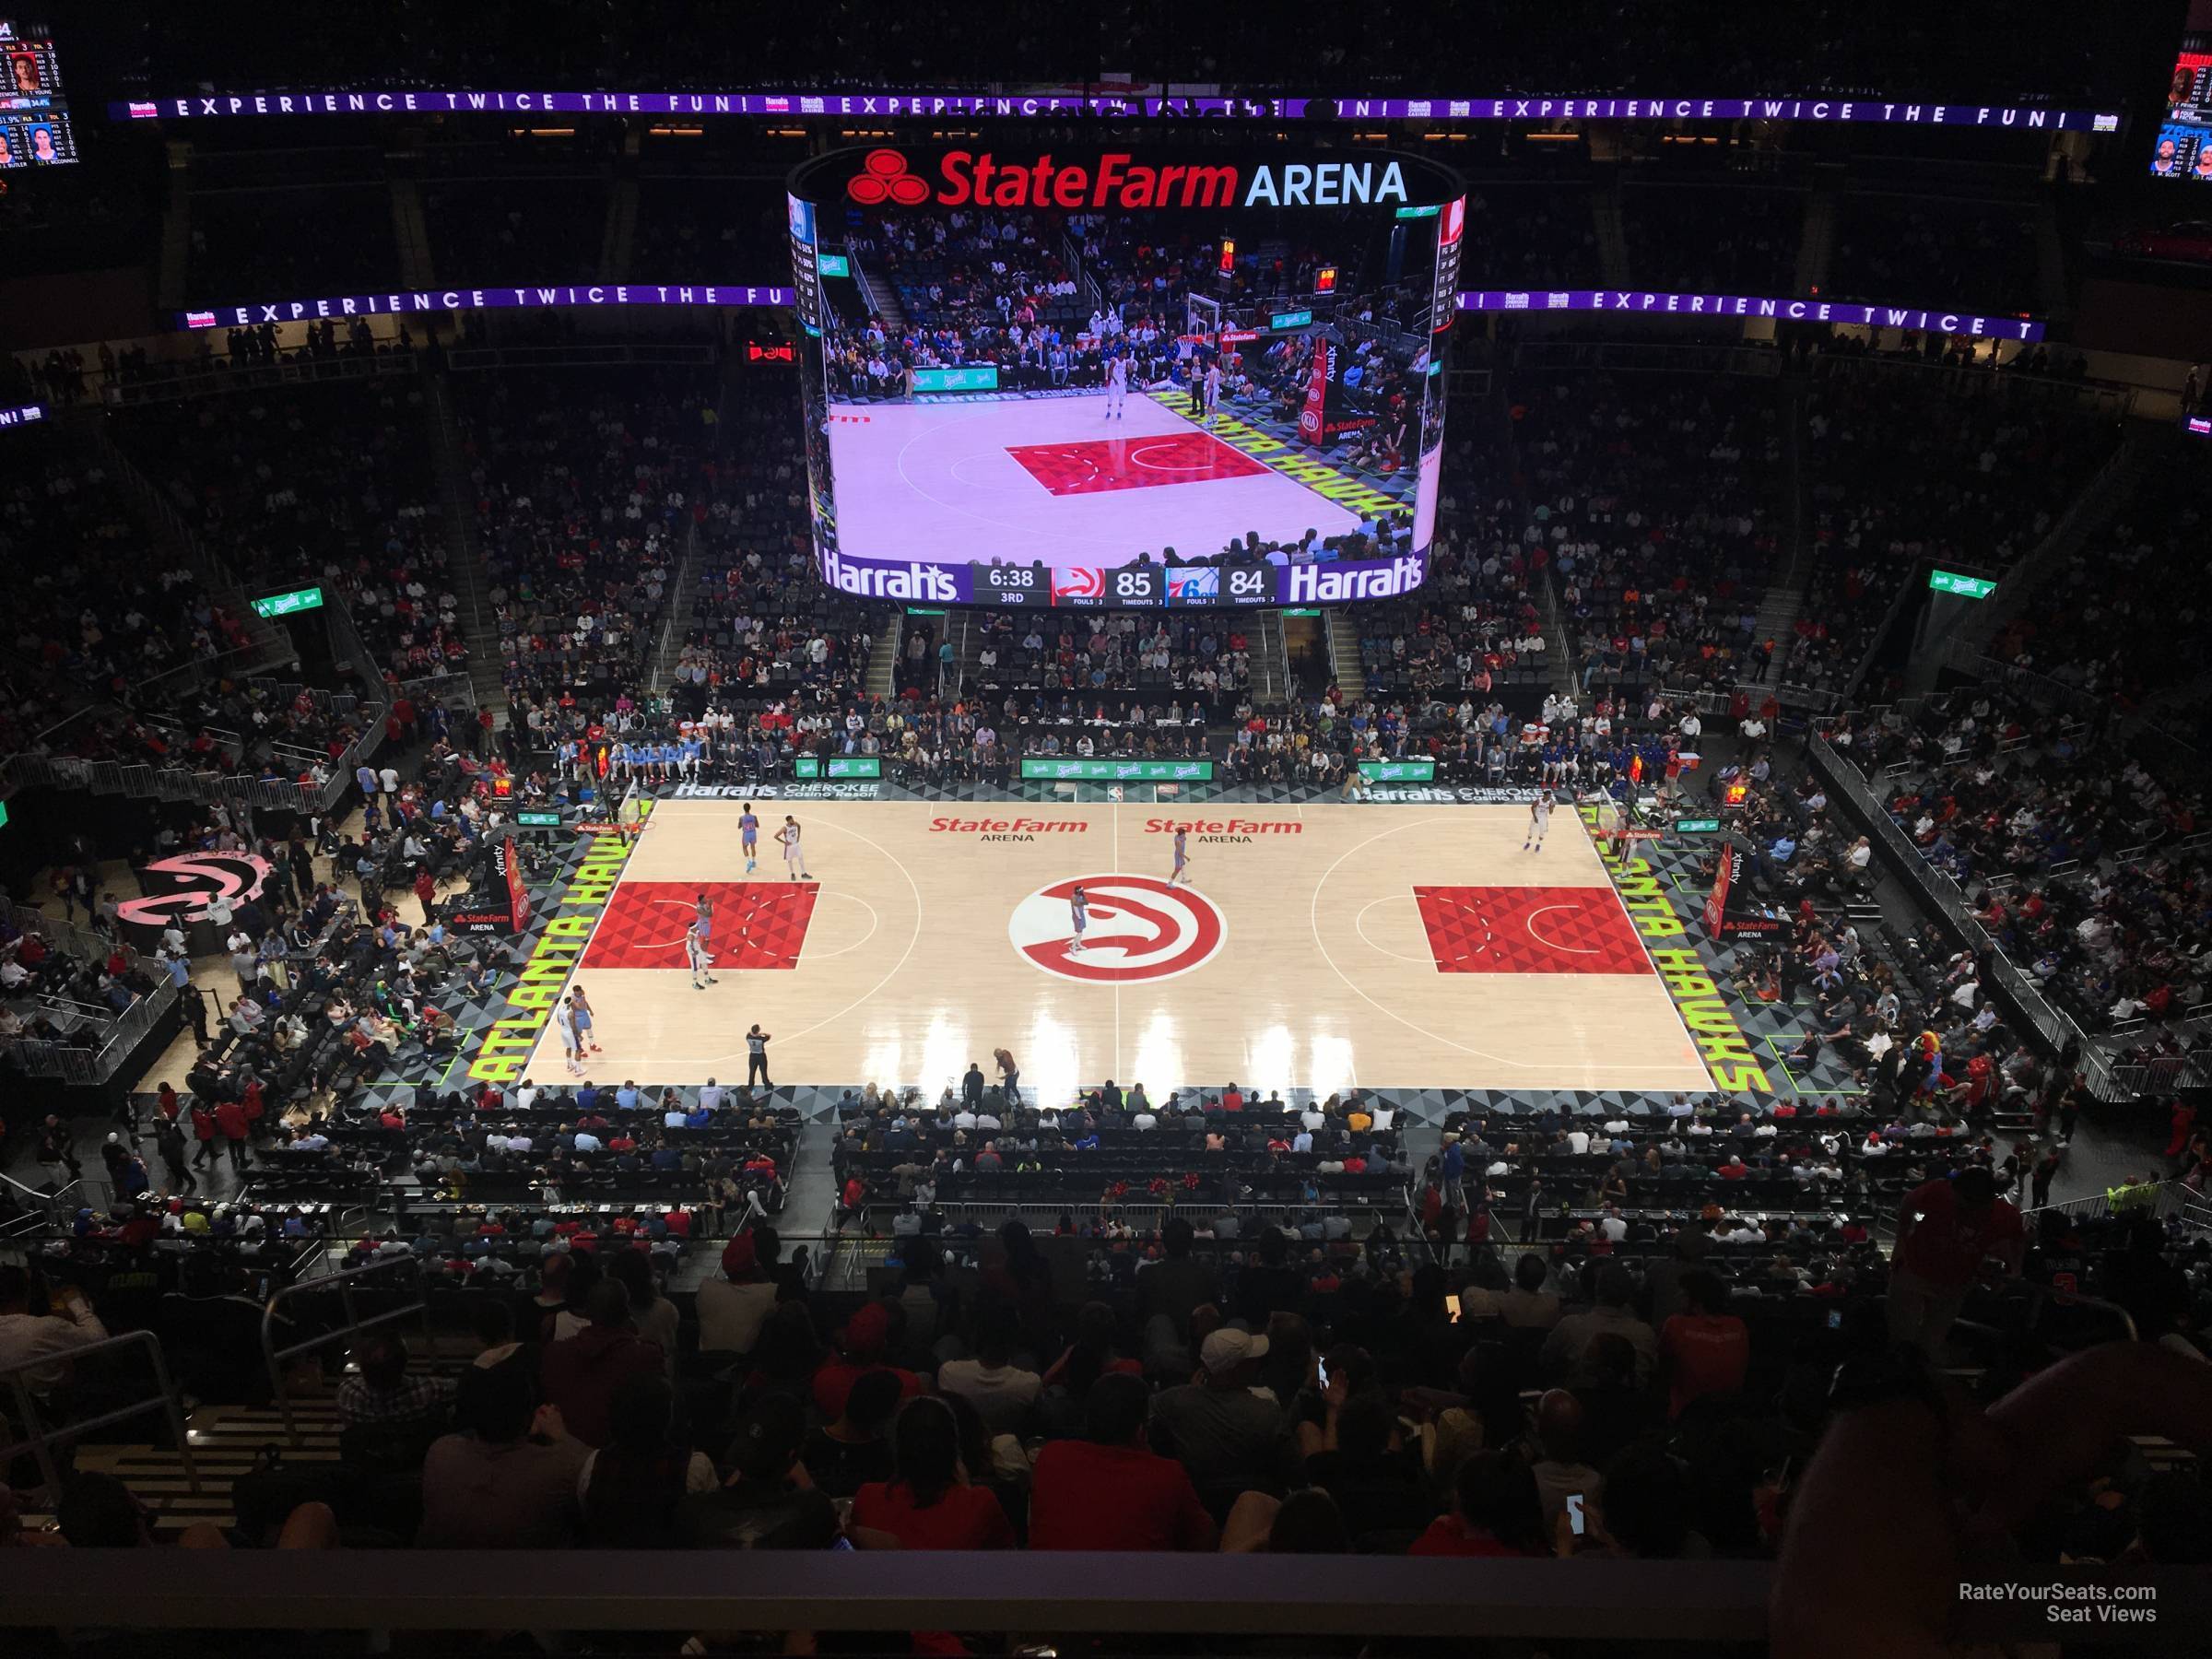 section 209, row n seat view  for basketball - state farm arena